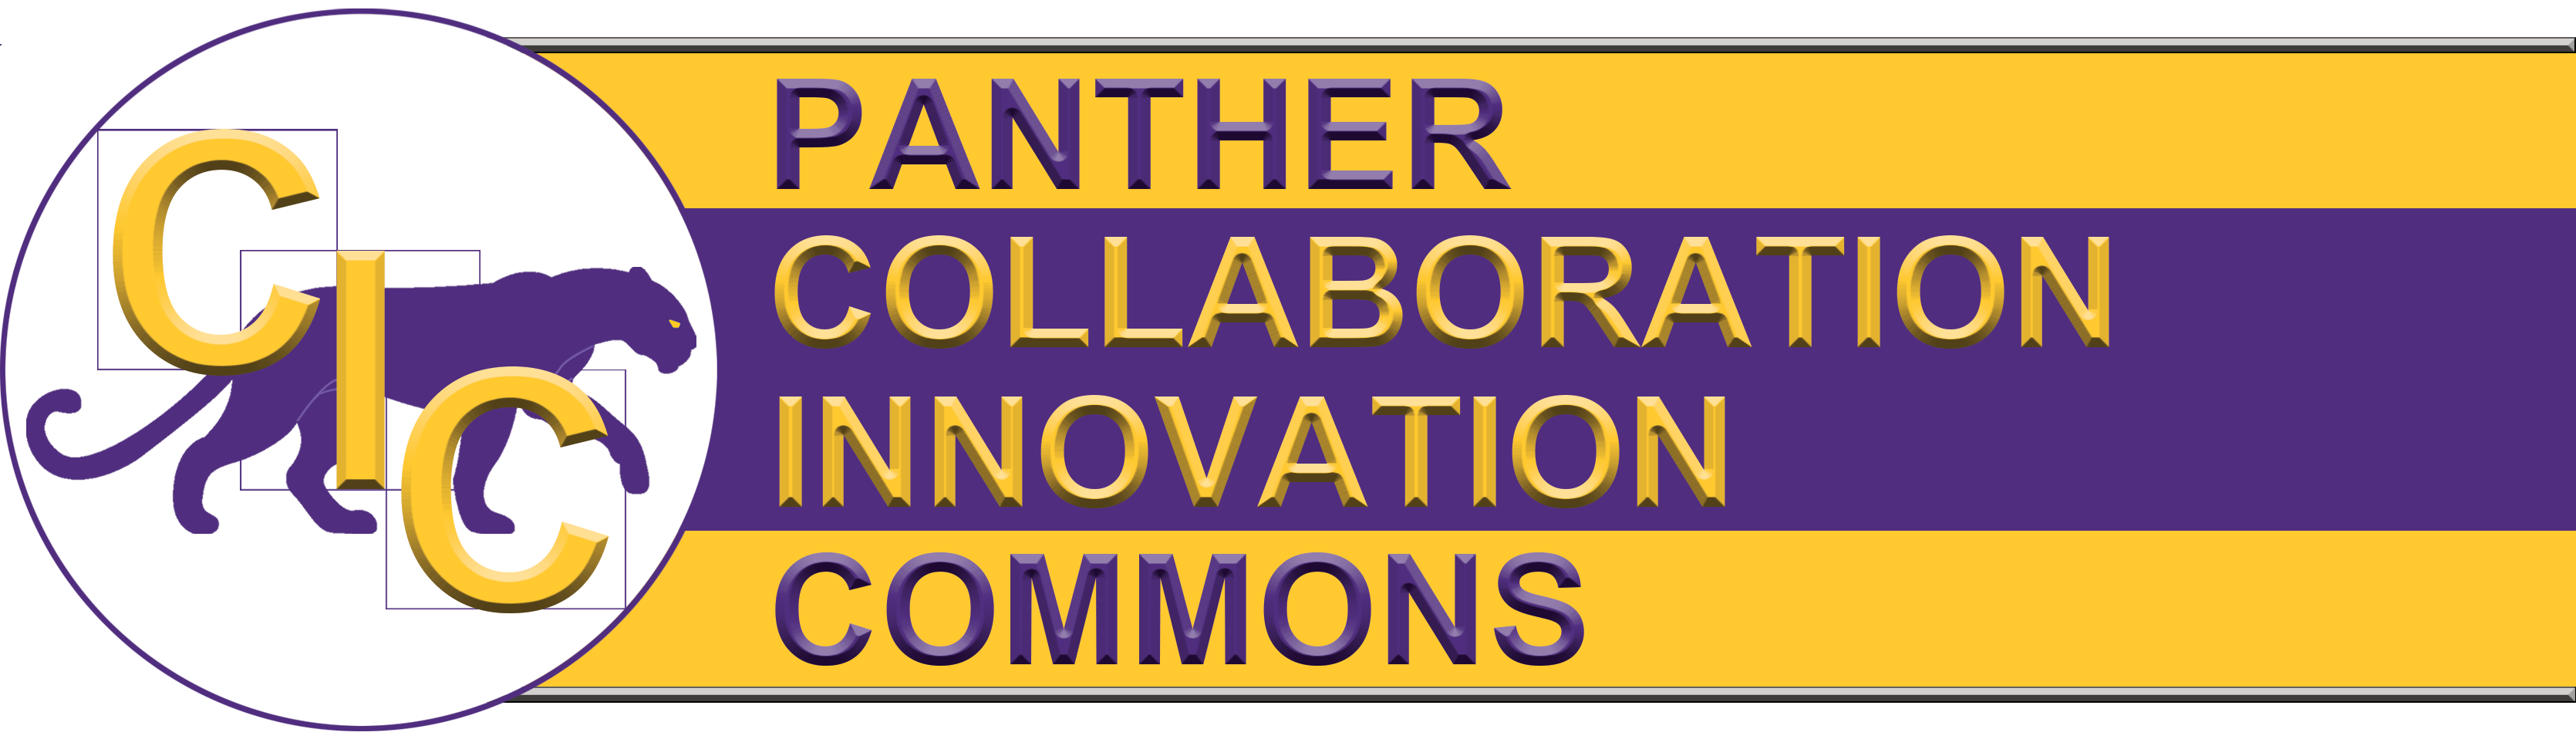 Panther Collaboration Innovation Commons